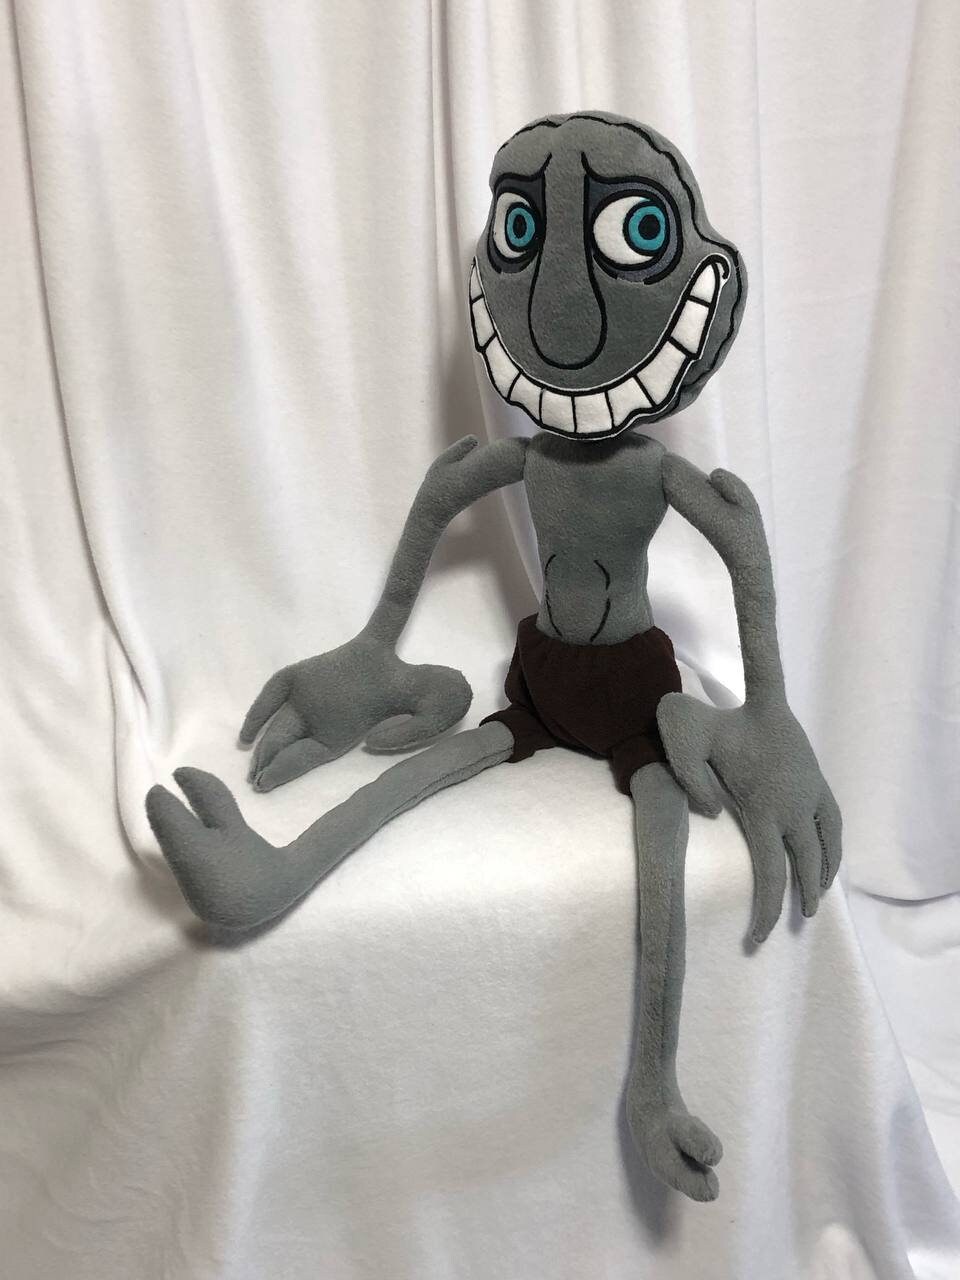 40cm The Man From The Window Plush Toy Horror Games Cartoon Gray